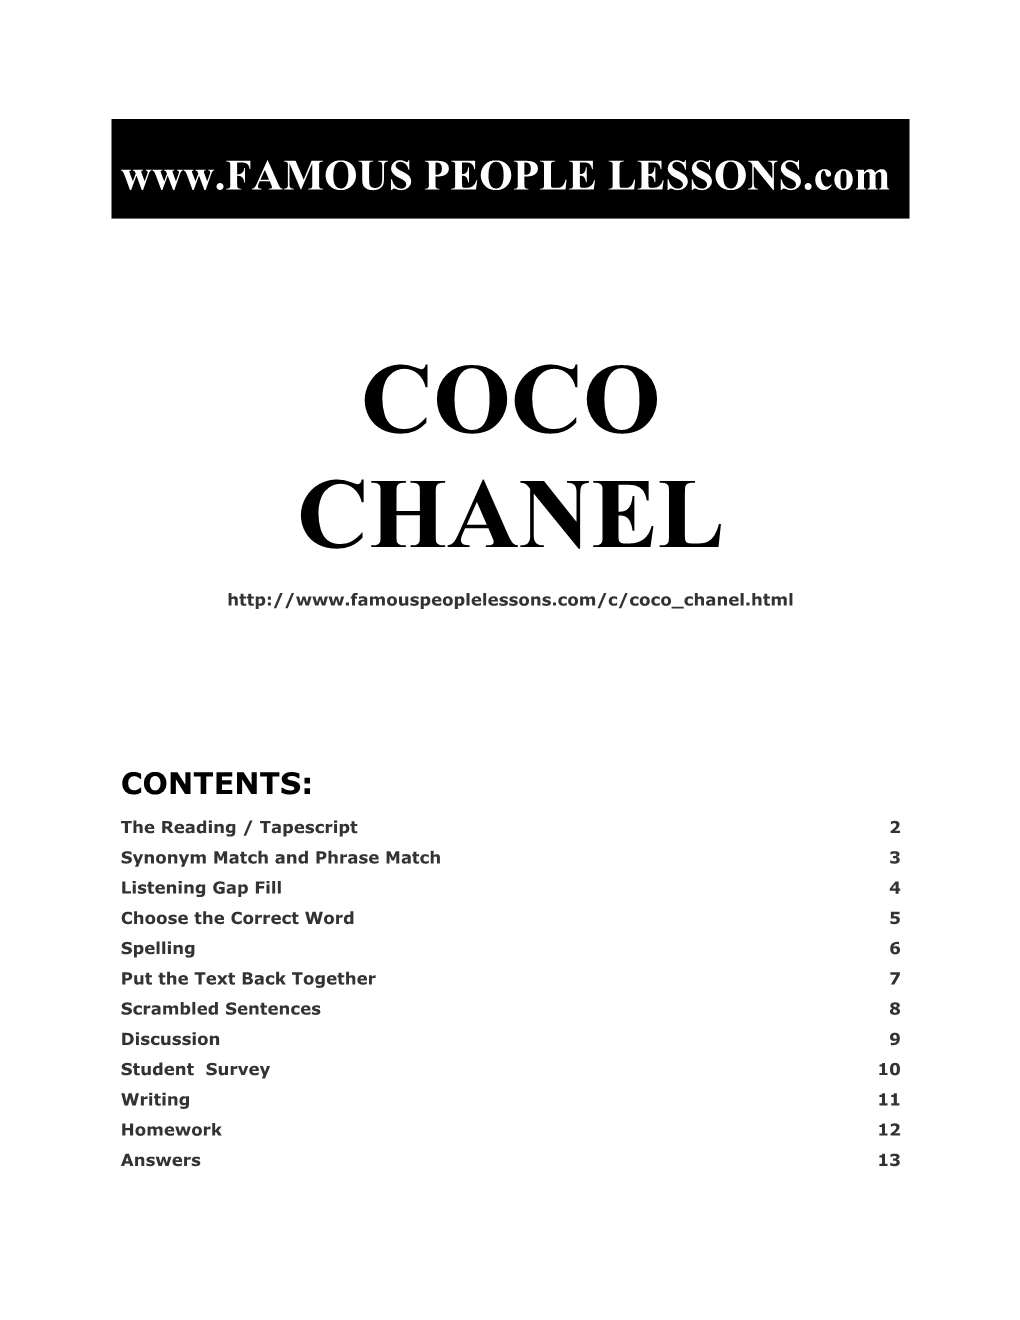 Famous People Lessons - Coco Chanel